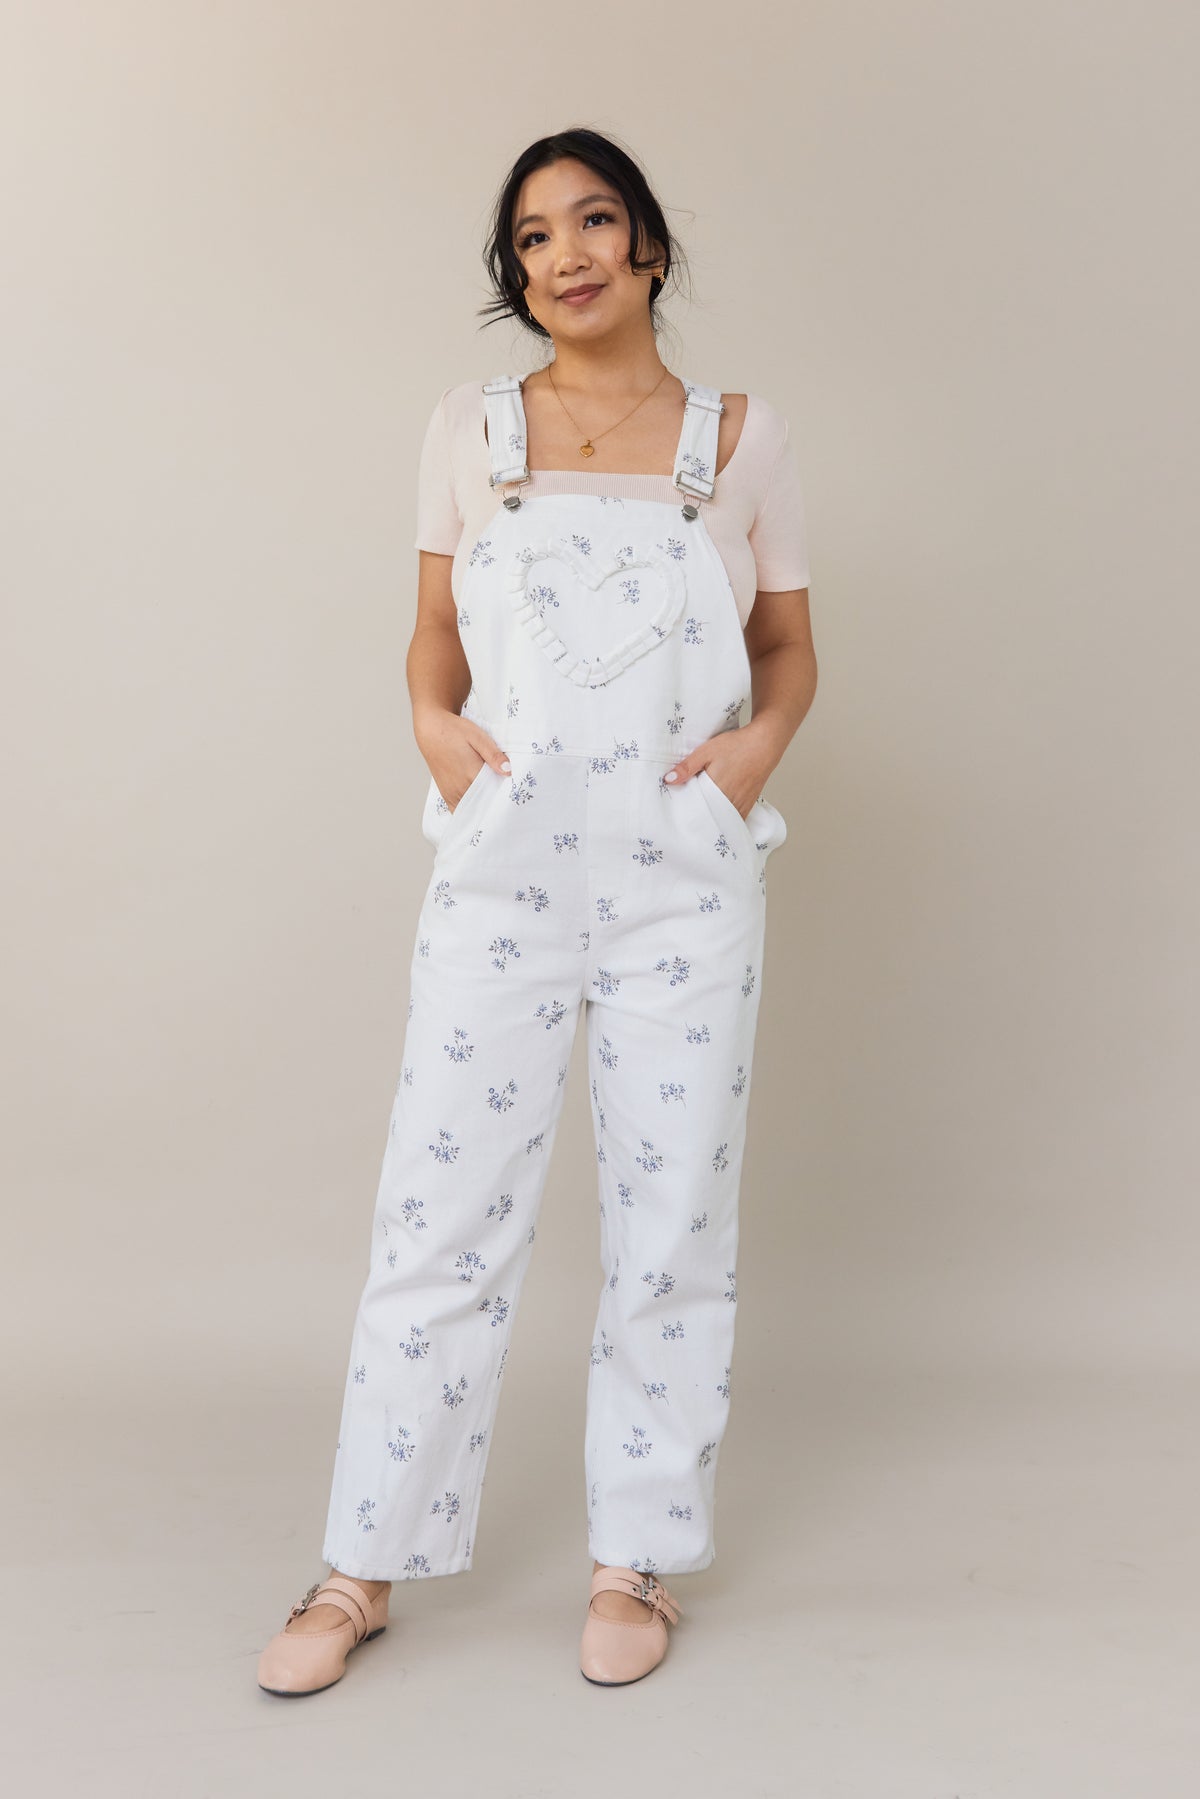 Field of Hearts Overalls